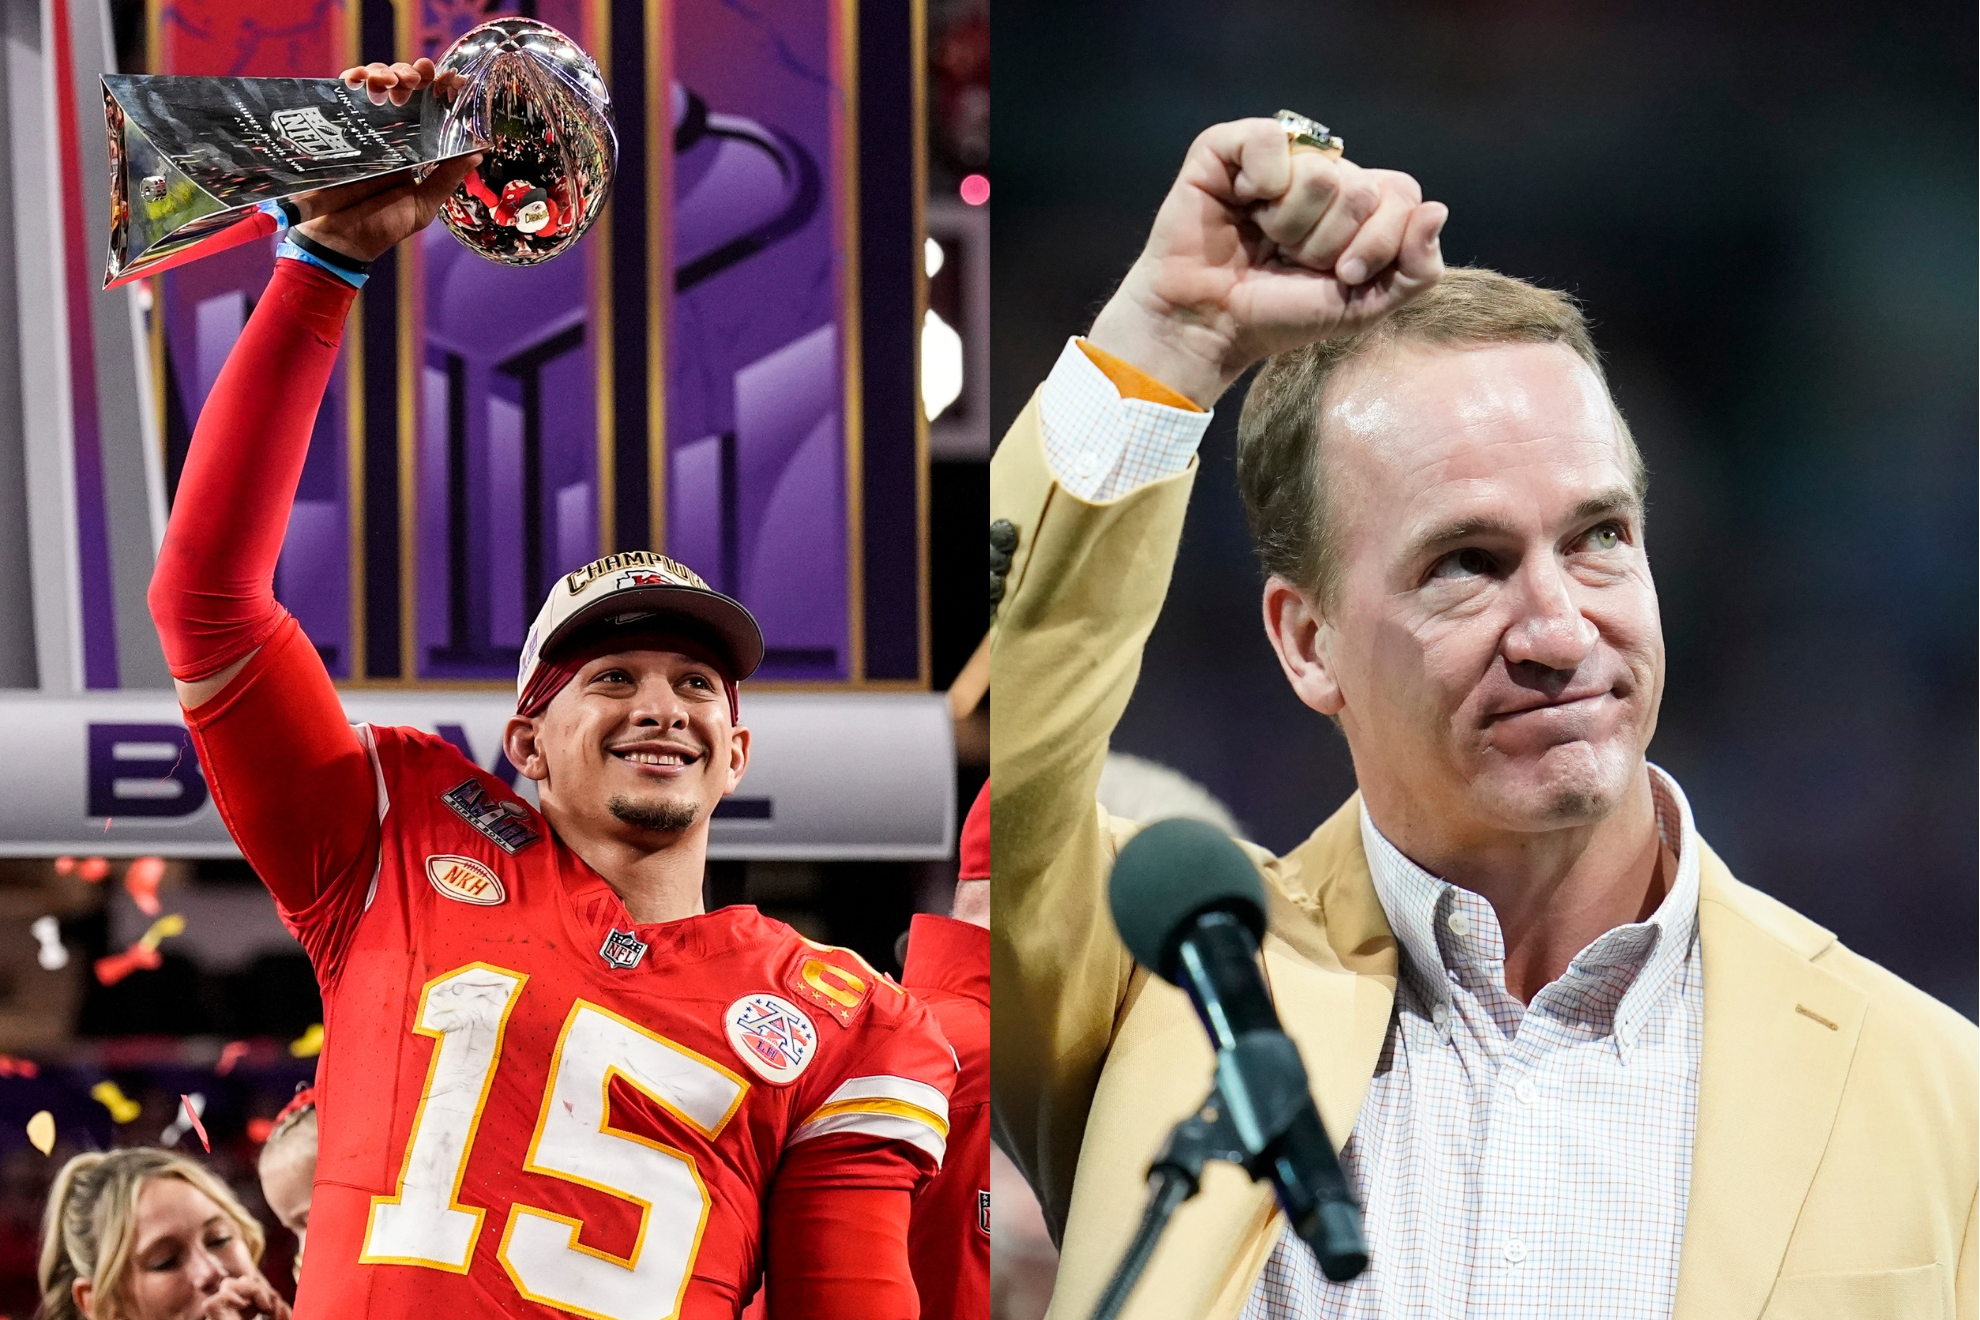 Mahomes (left) has won three Super Bowls already; Manning (right) won two in his career.